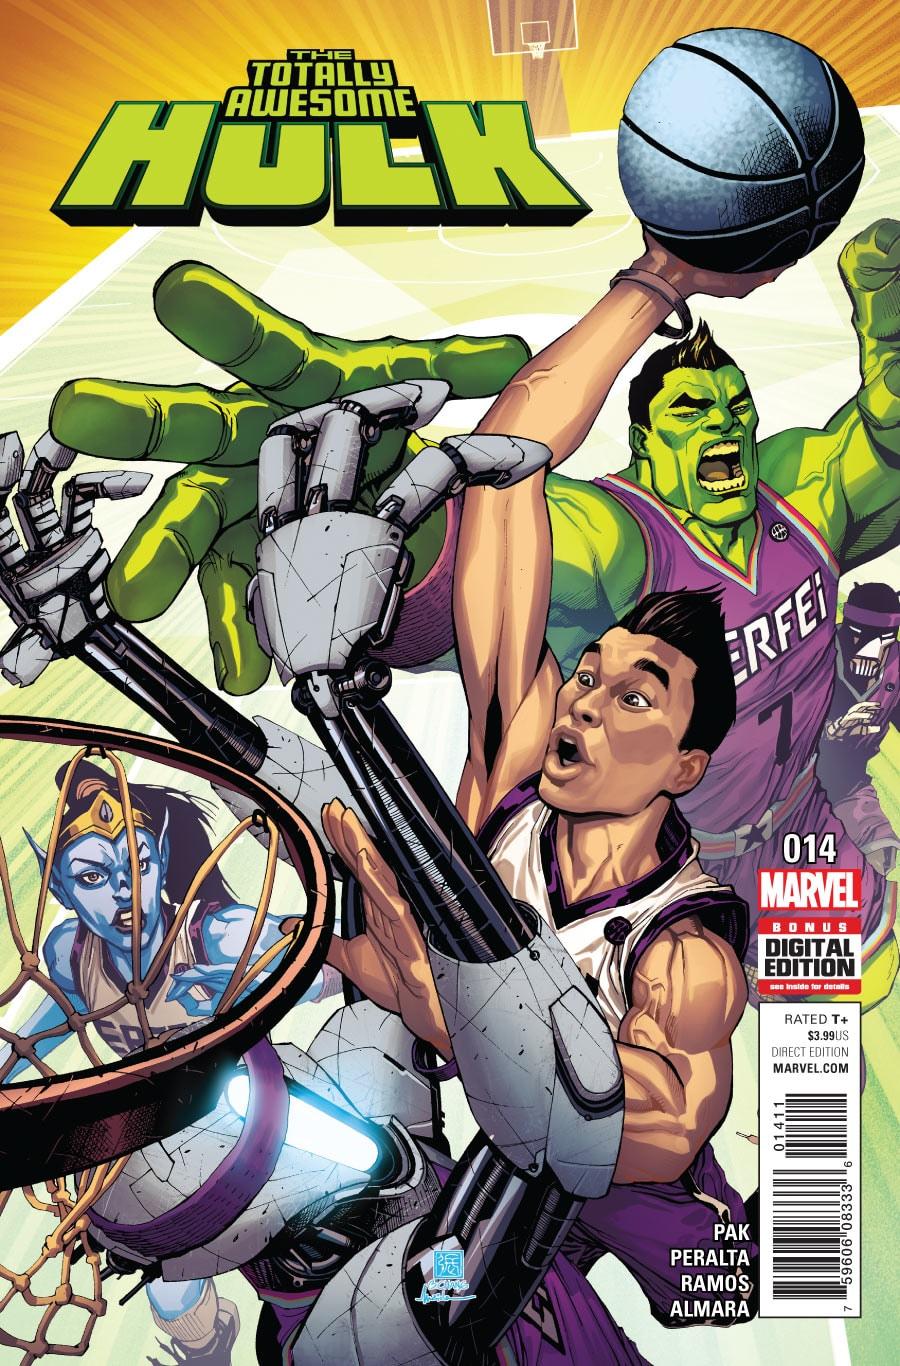 Totally Awesome Hulk Vol. 1 #14